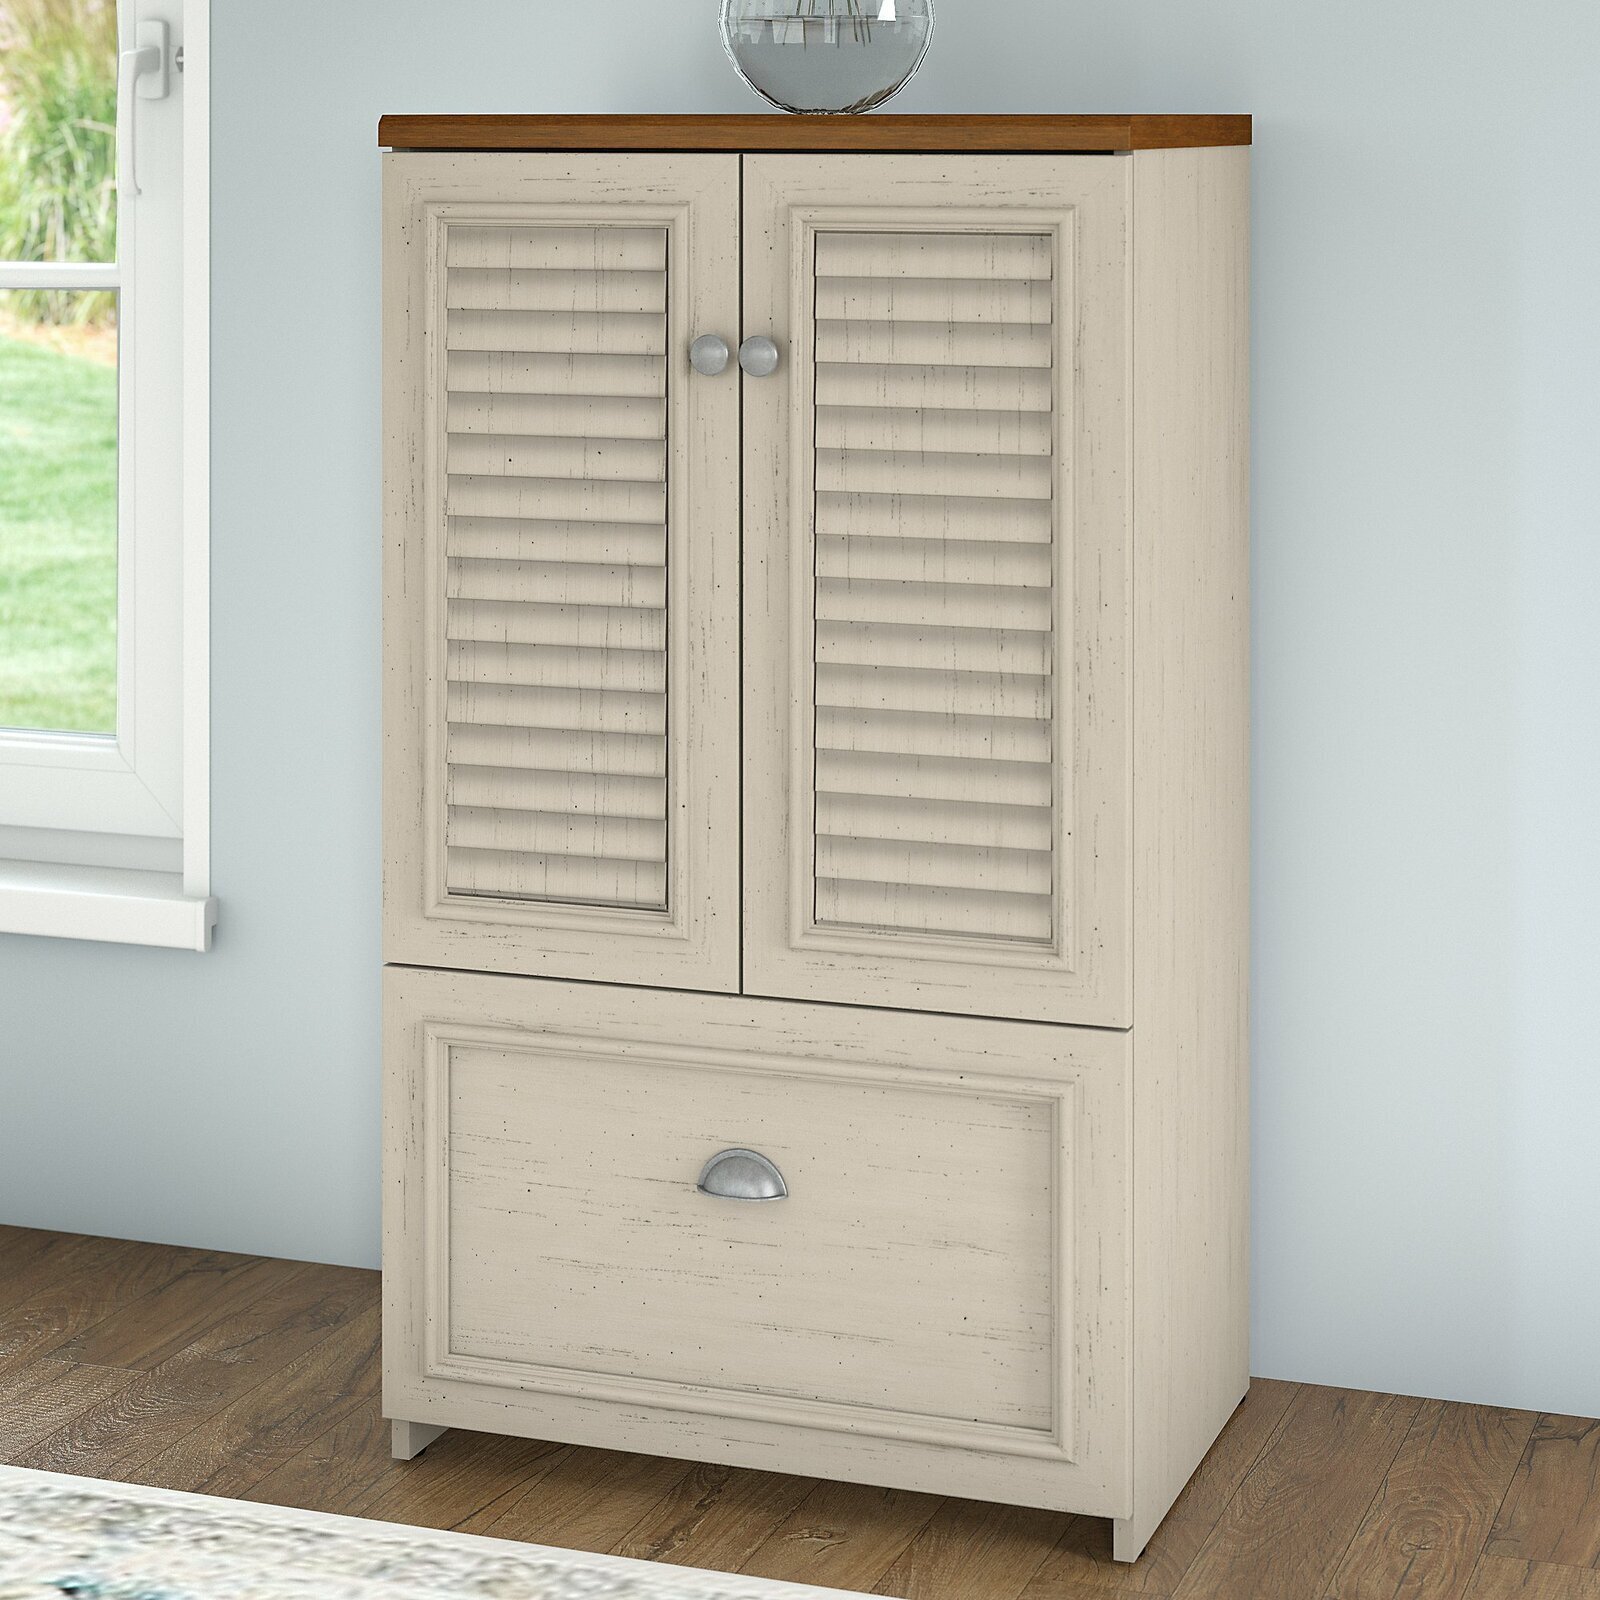 Stylish Filing Cabinet with Cupboard Doors